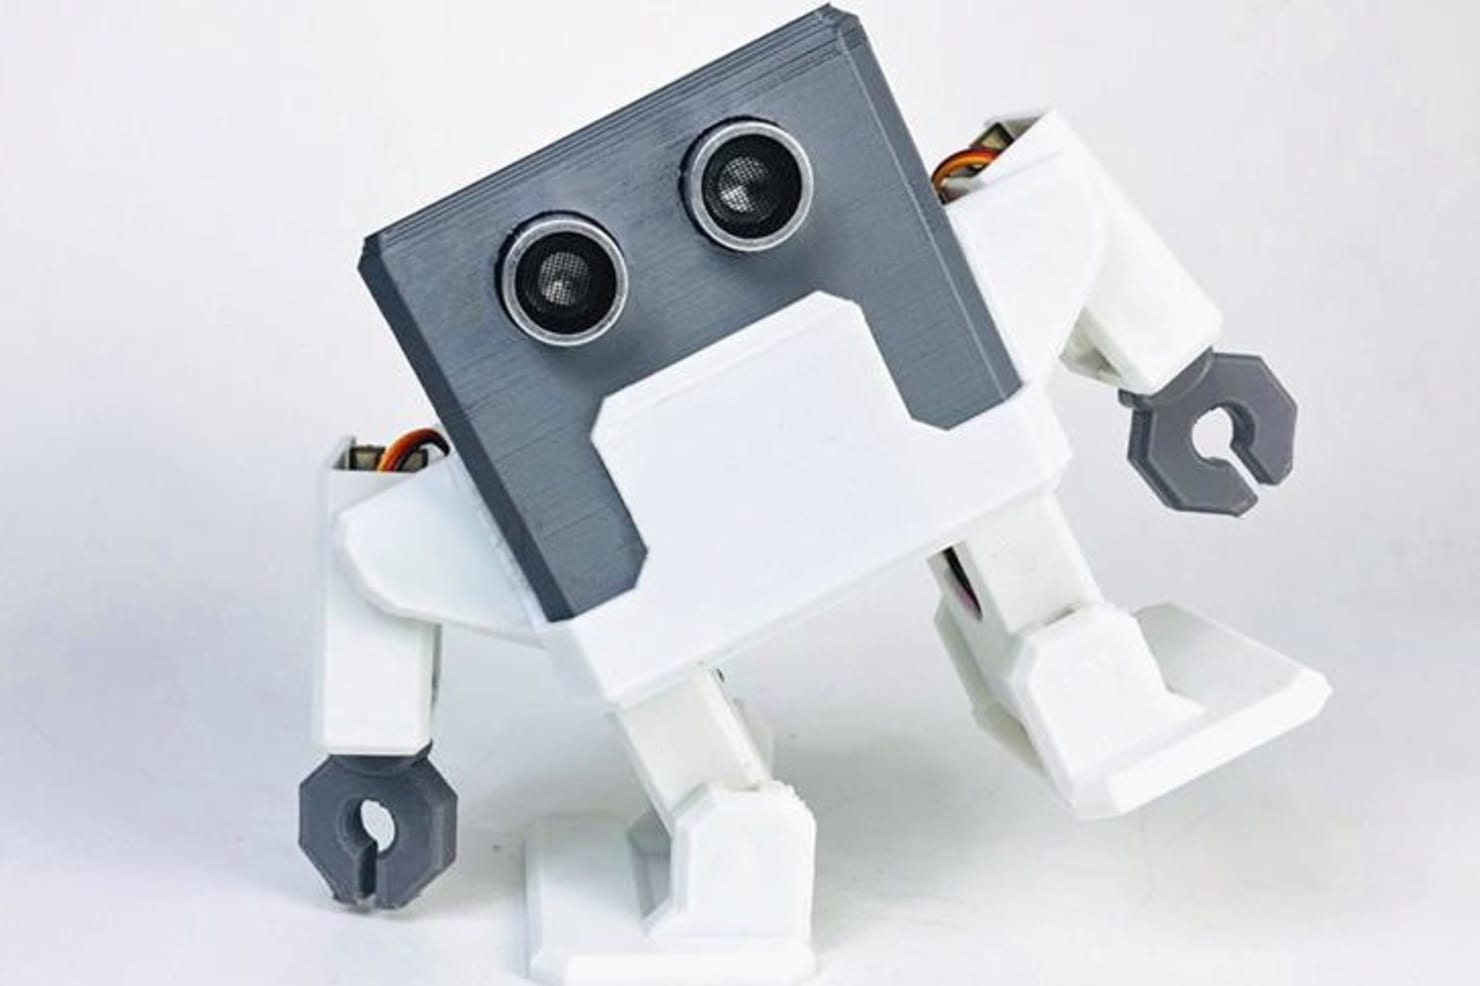 Otto Diy Robot Kit Otto Diy Overview Wikifactory Otto Diy Plus Is